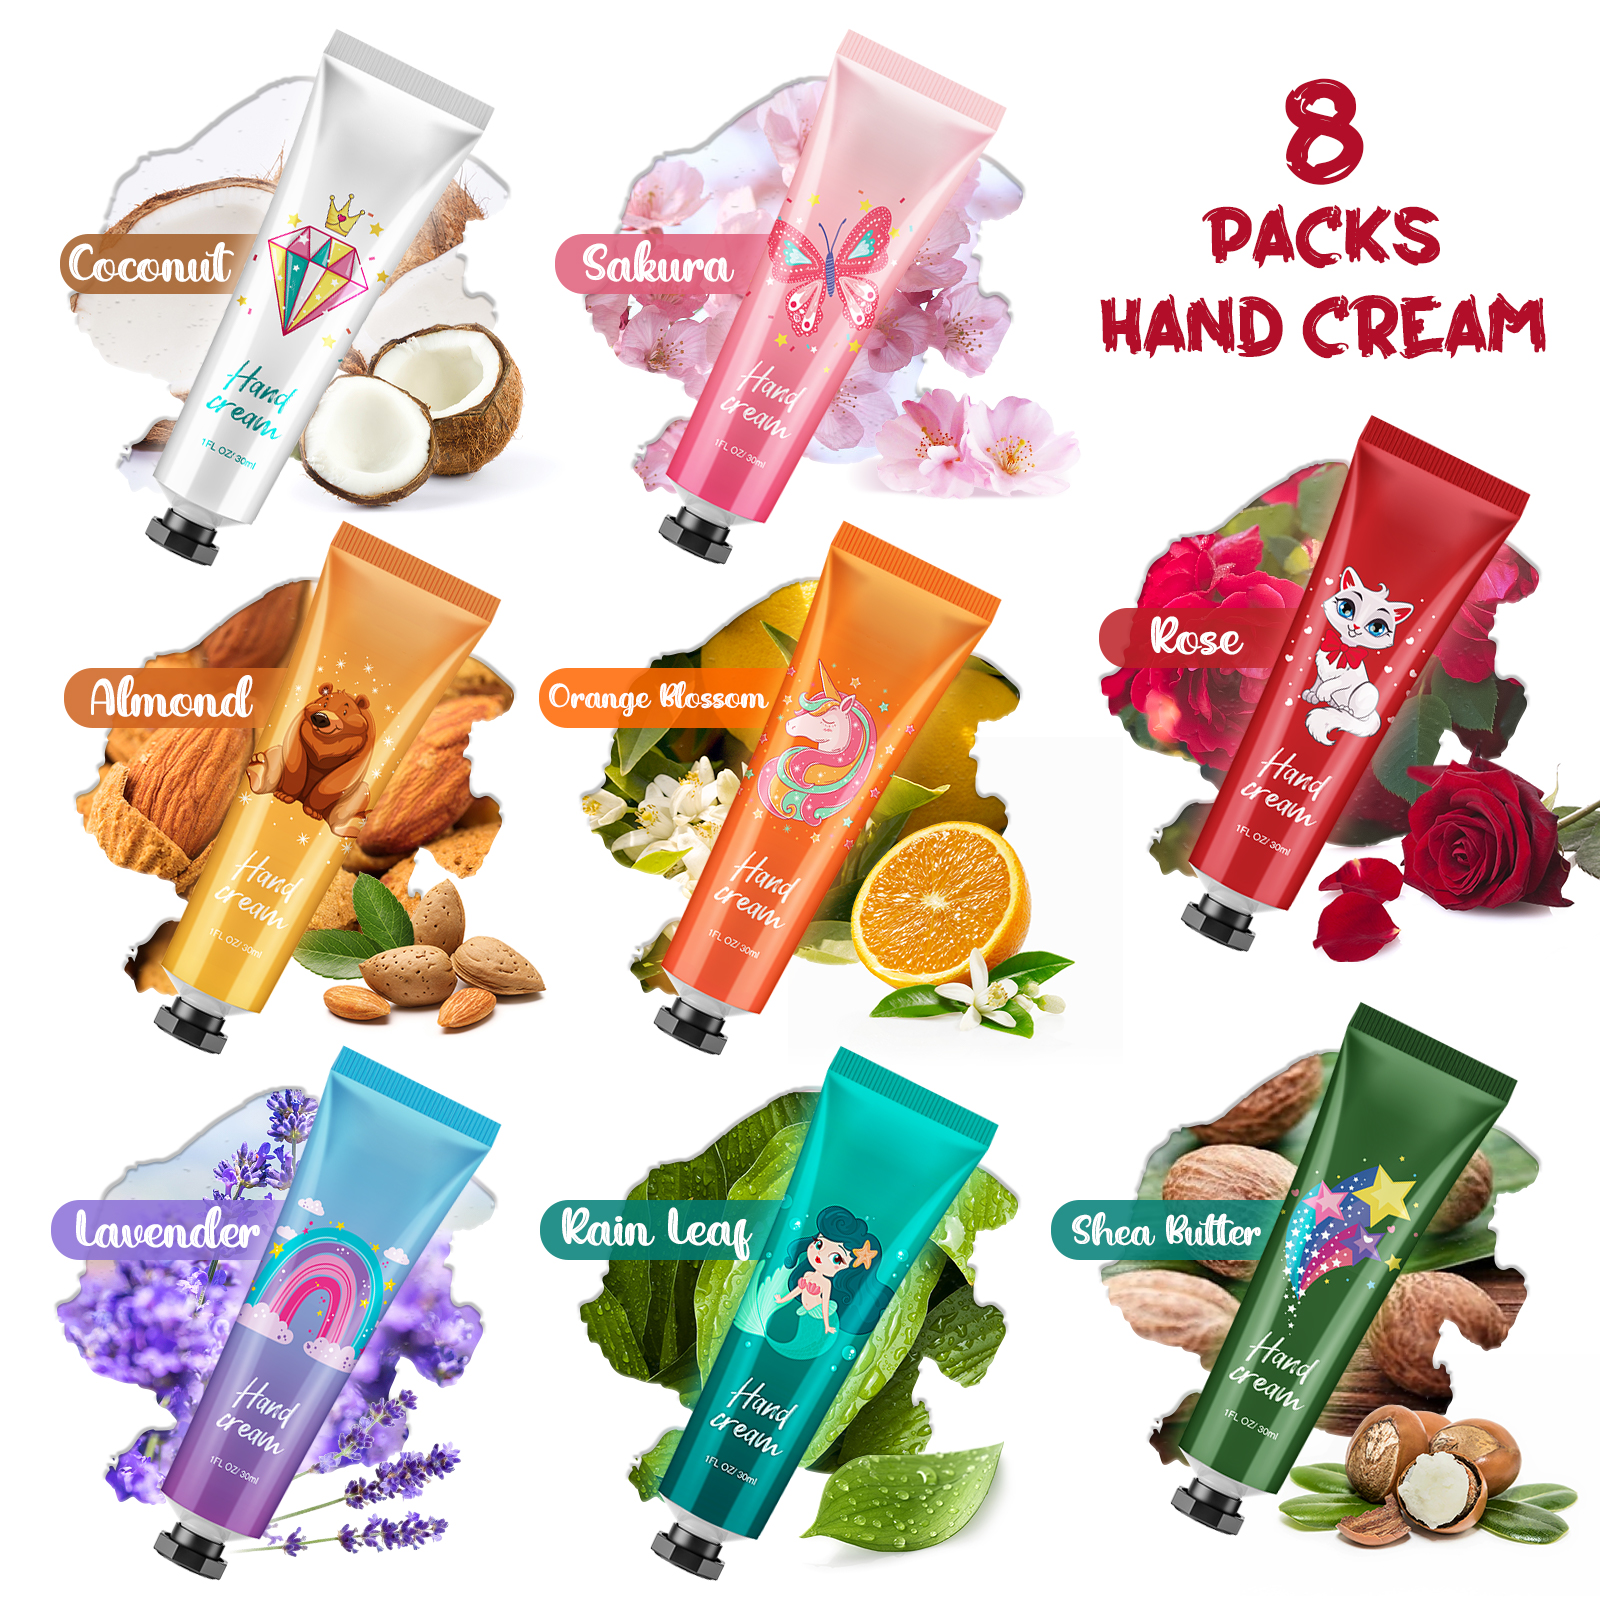 GLAMADOR-Hand-Cream-Gift-Set-9-Pcs-Travel-Size-Hand-Lotion-30ml-with-Lip-Balm-Hand-Cream-for-Dry-Cra-1940081-1